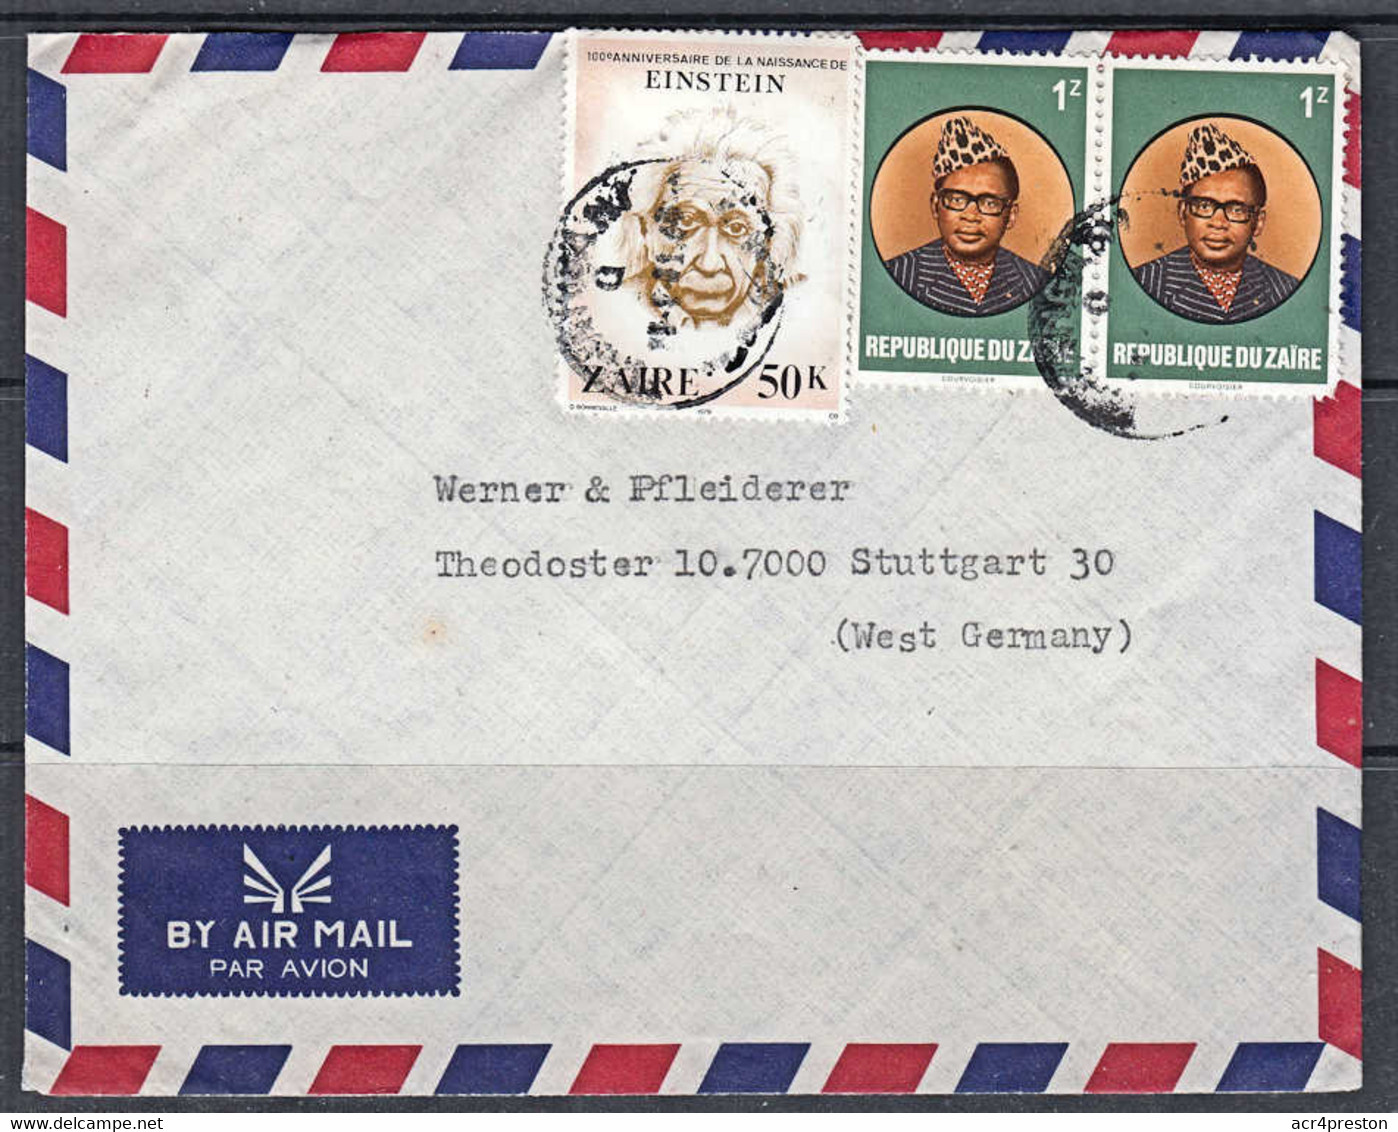 Ca0637  ZAIRE 1981,  Einstein And Mobutu Stamps On Kisangani Cover To Germany - Gebraucht